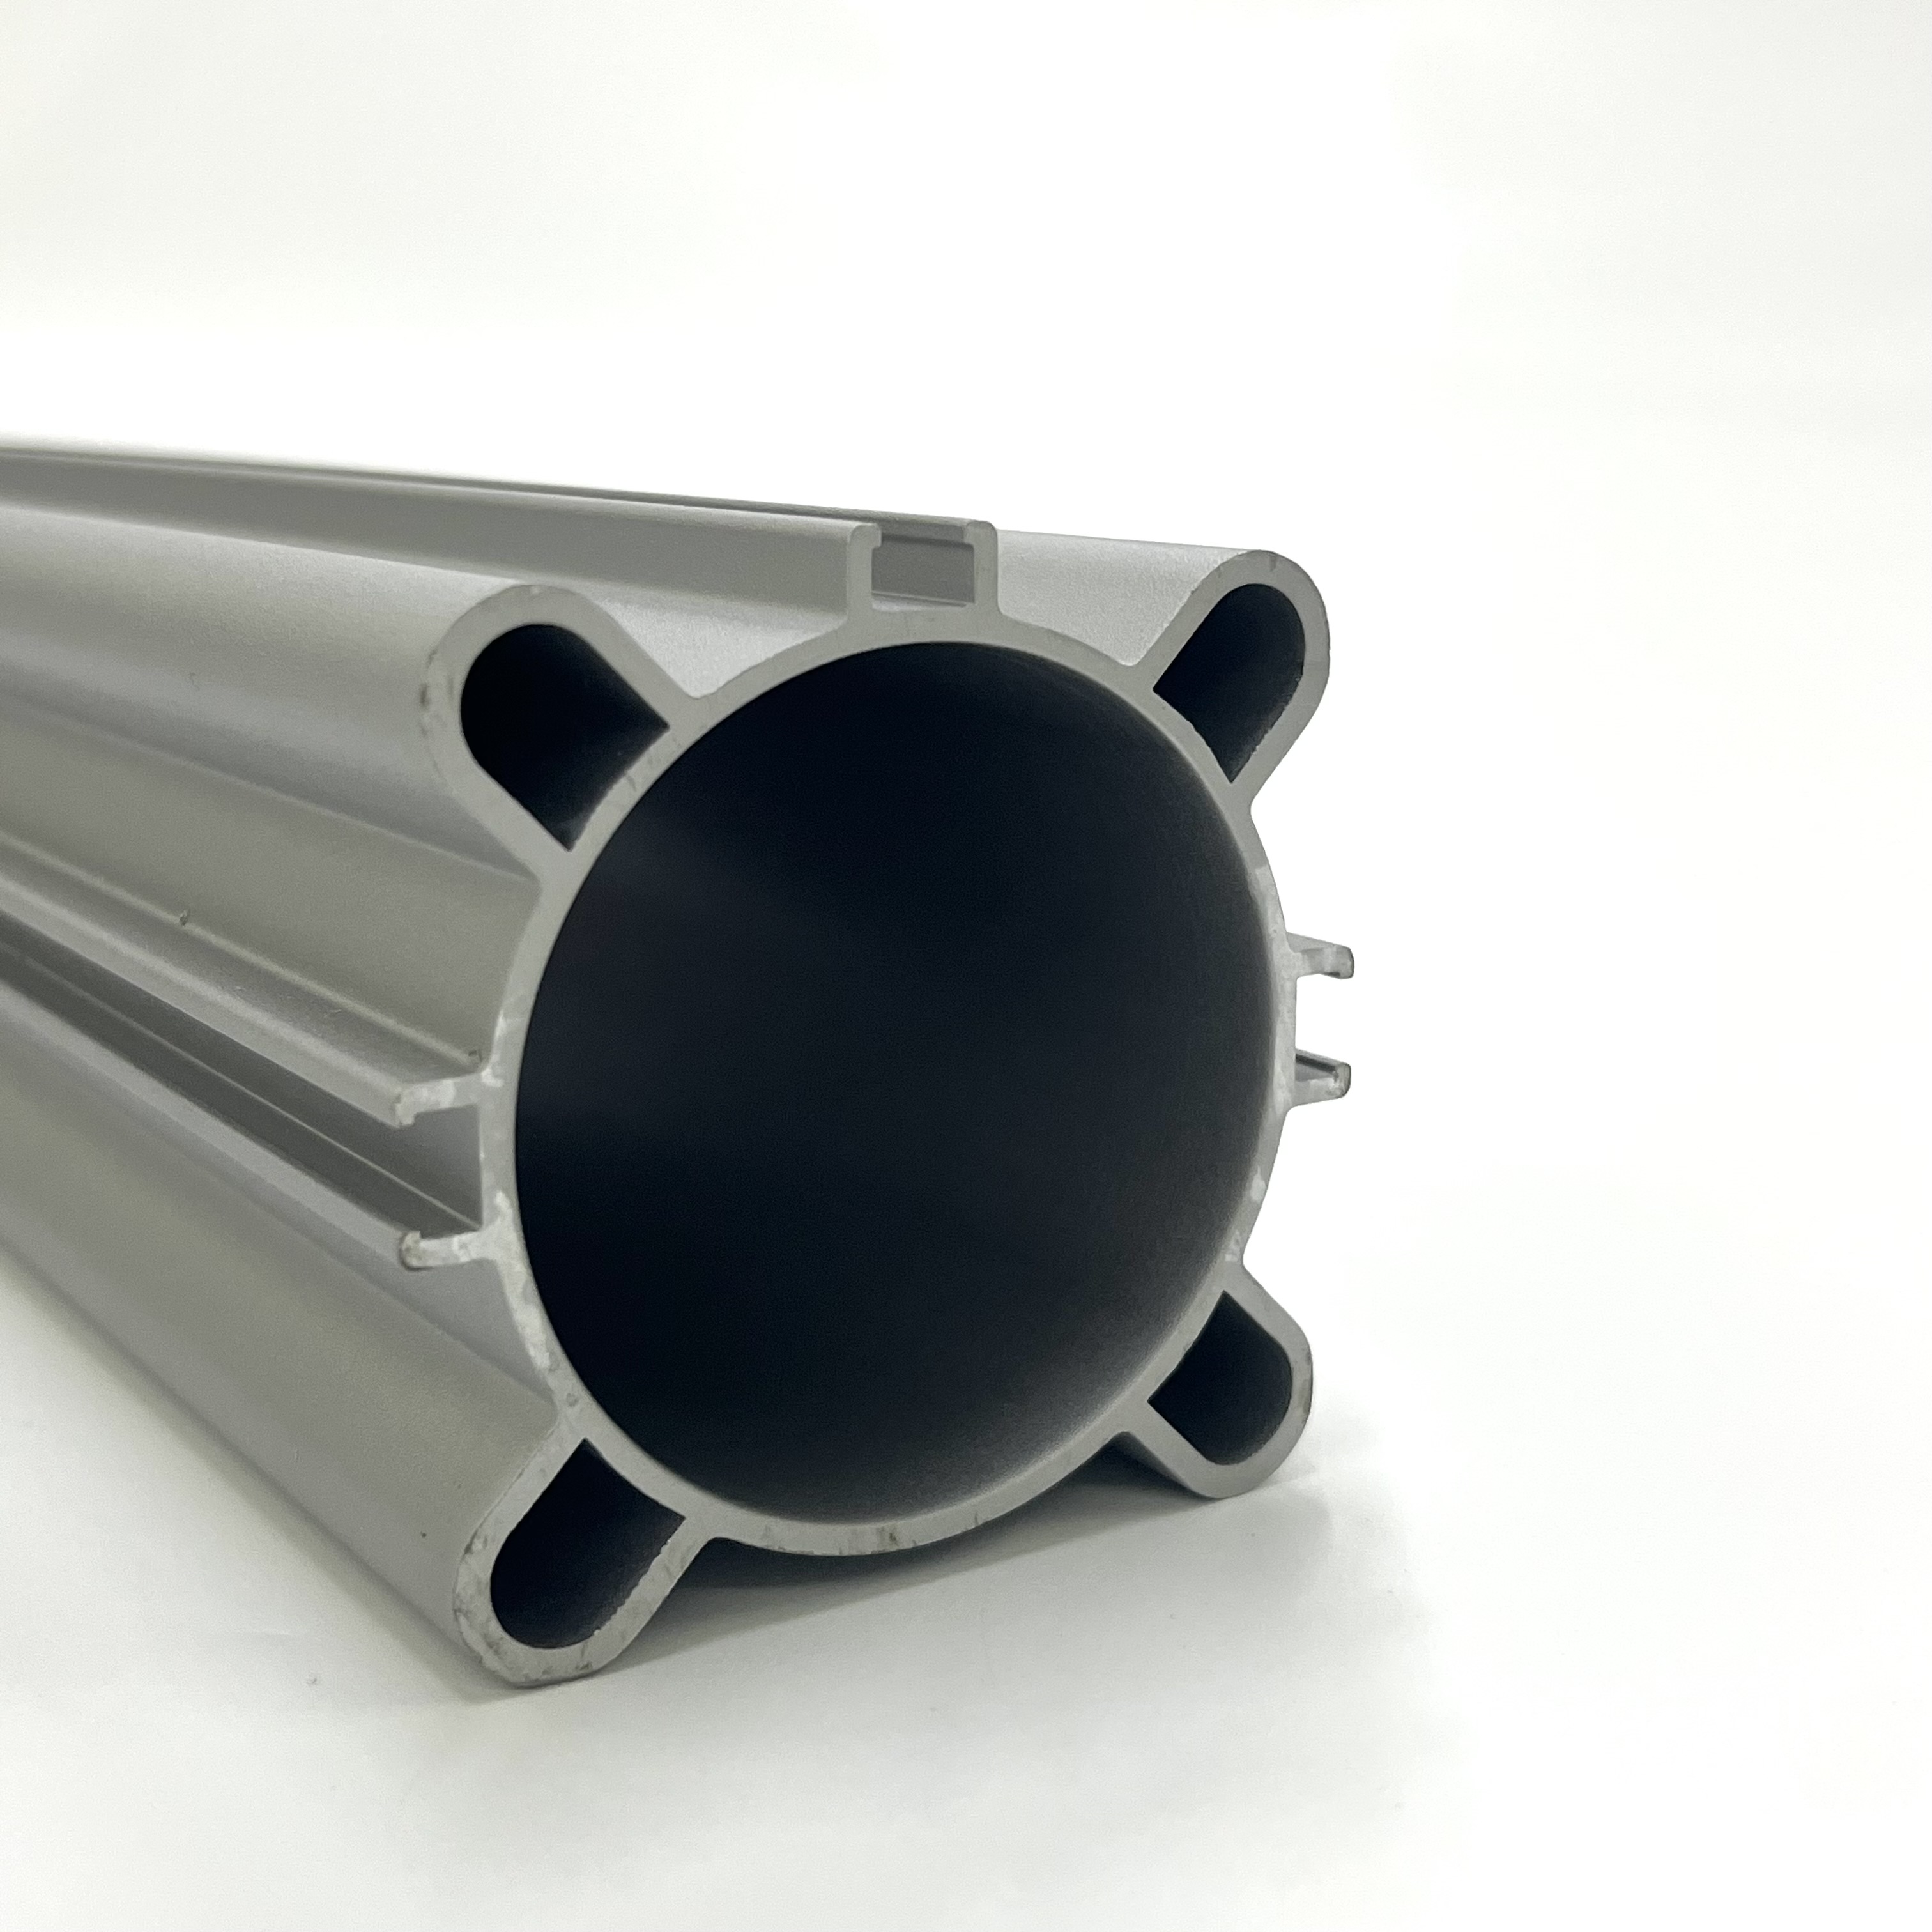 ISO-C ISO6431 ISO15552 MICSY MOUSE 3 سېنزور CHANNEL ALUMINUM PNEUMATIC CYLINDER TUBE